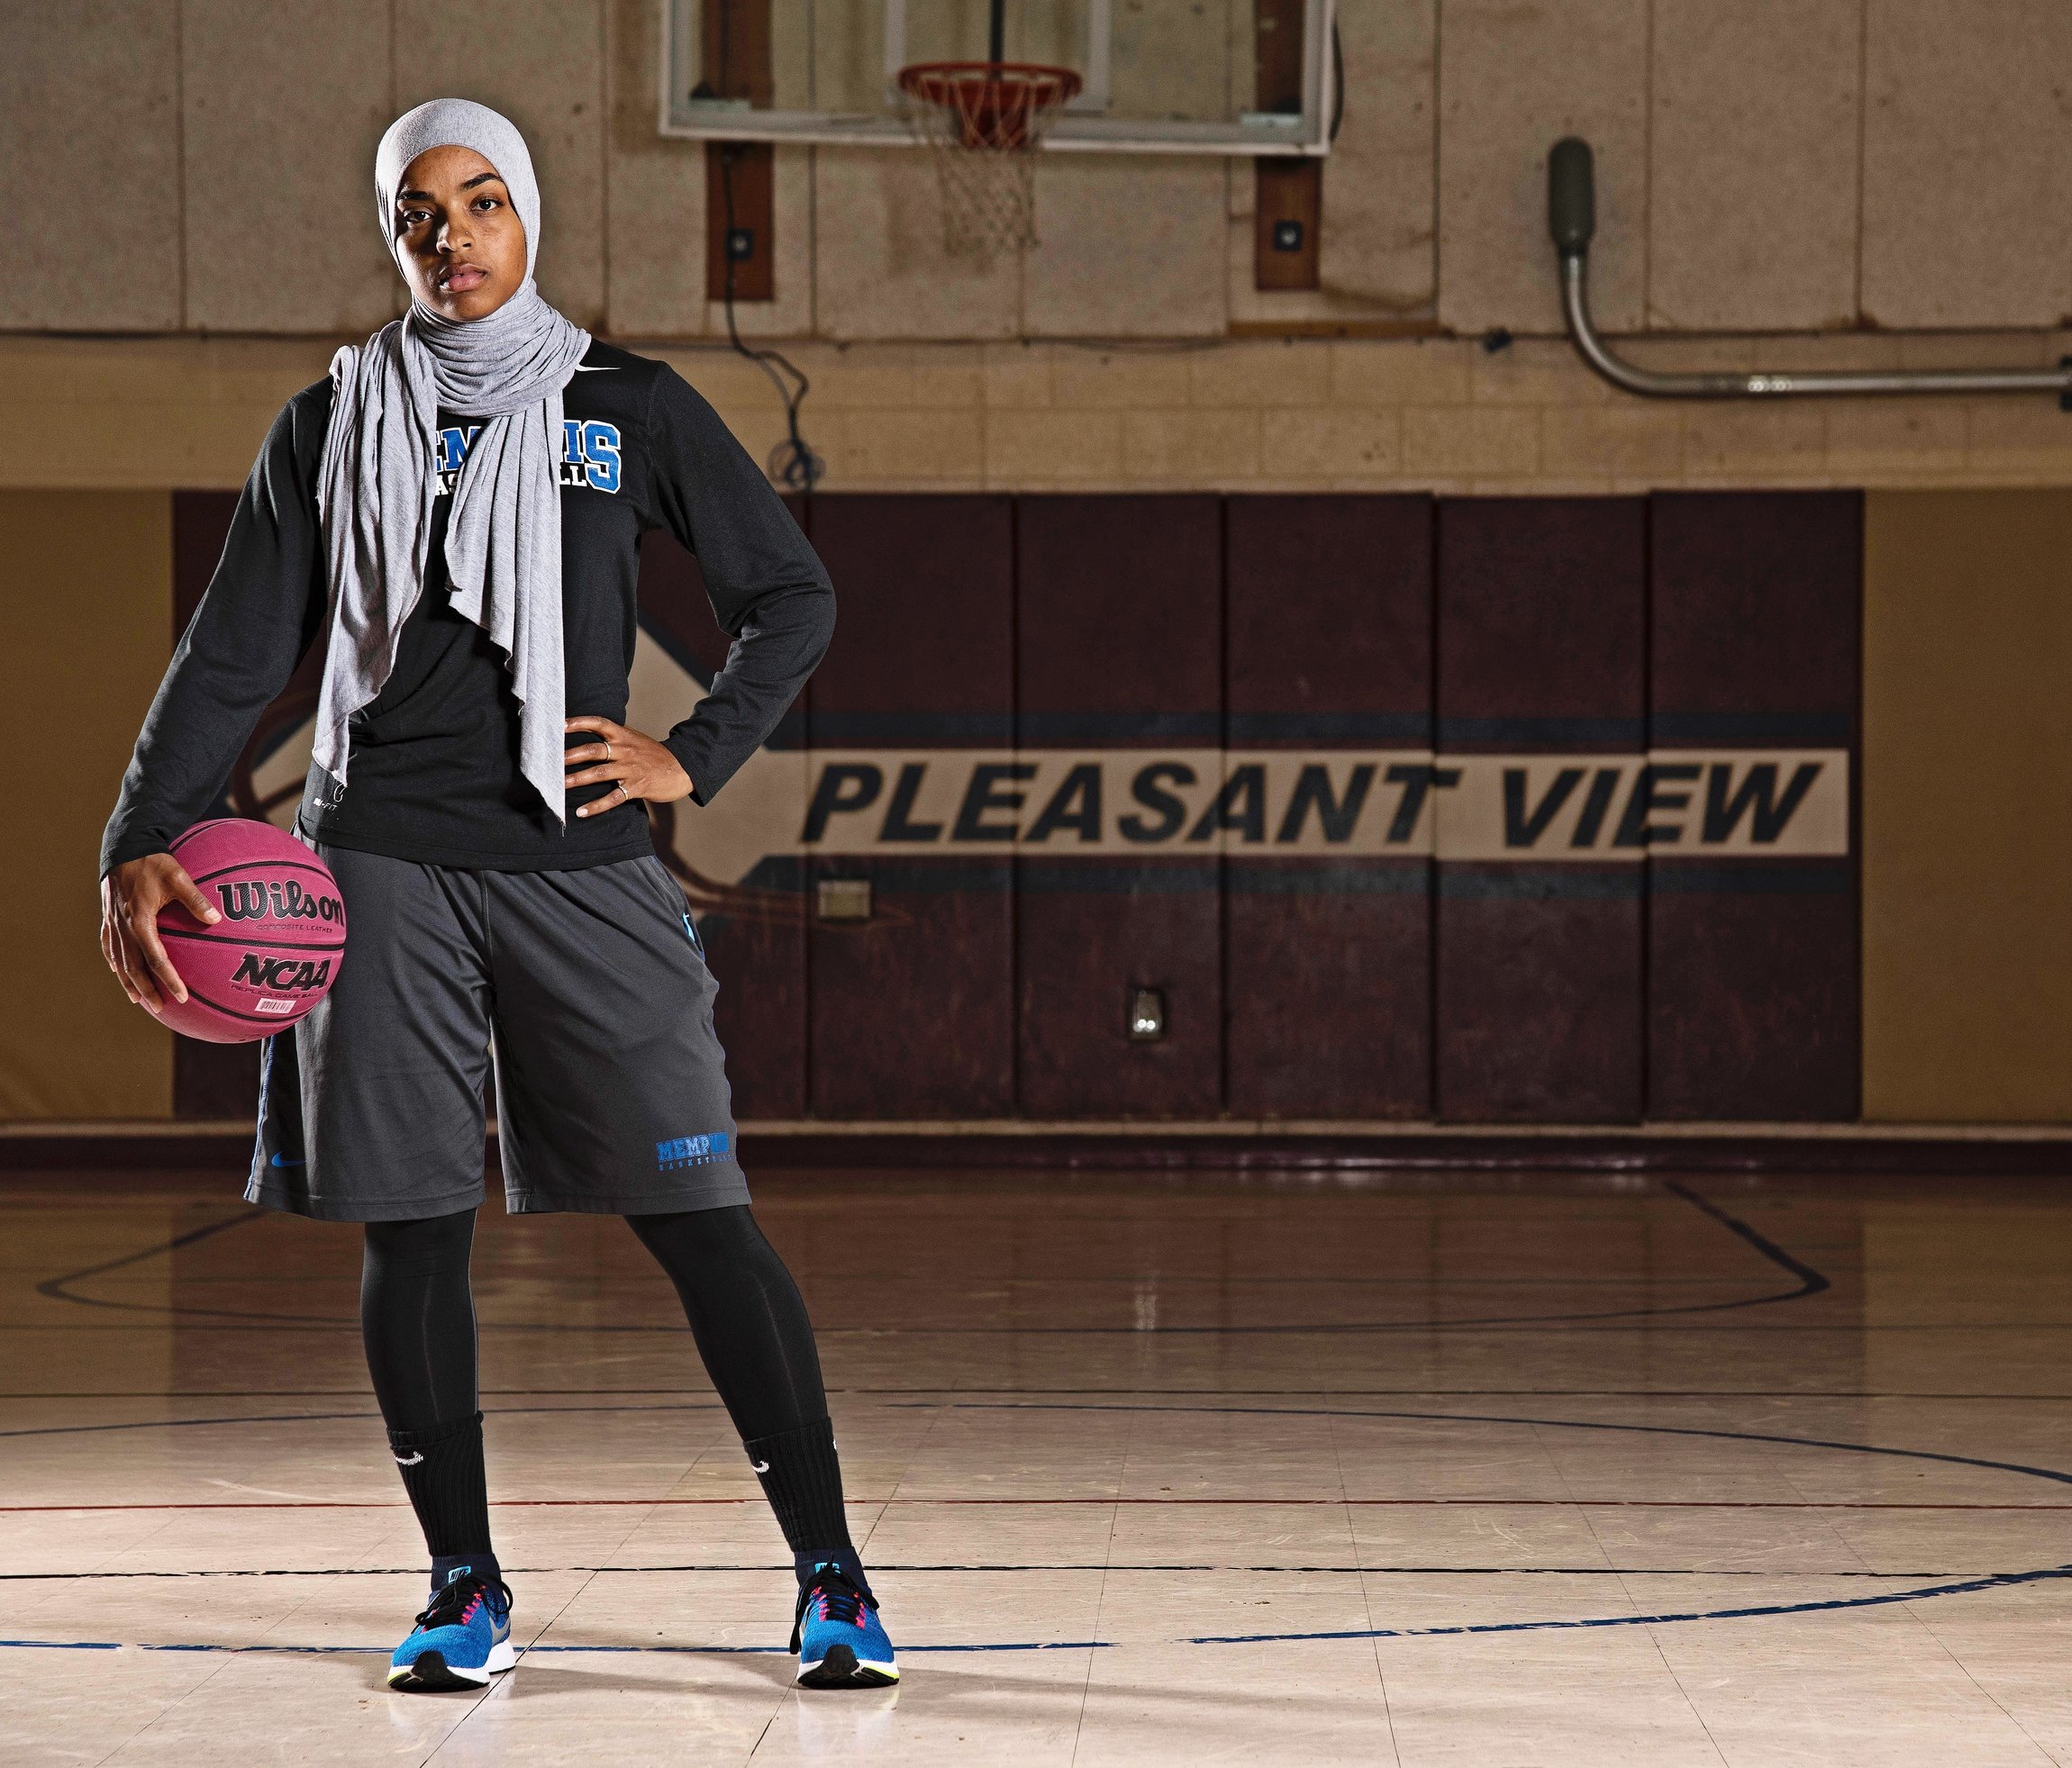 Her Pro Dreams Shot, This Muslim Player Pivots To The Next Generation